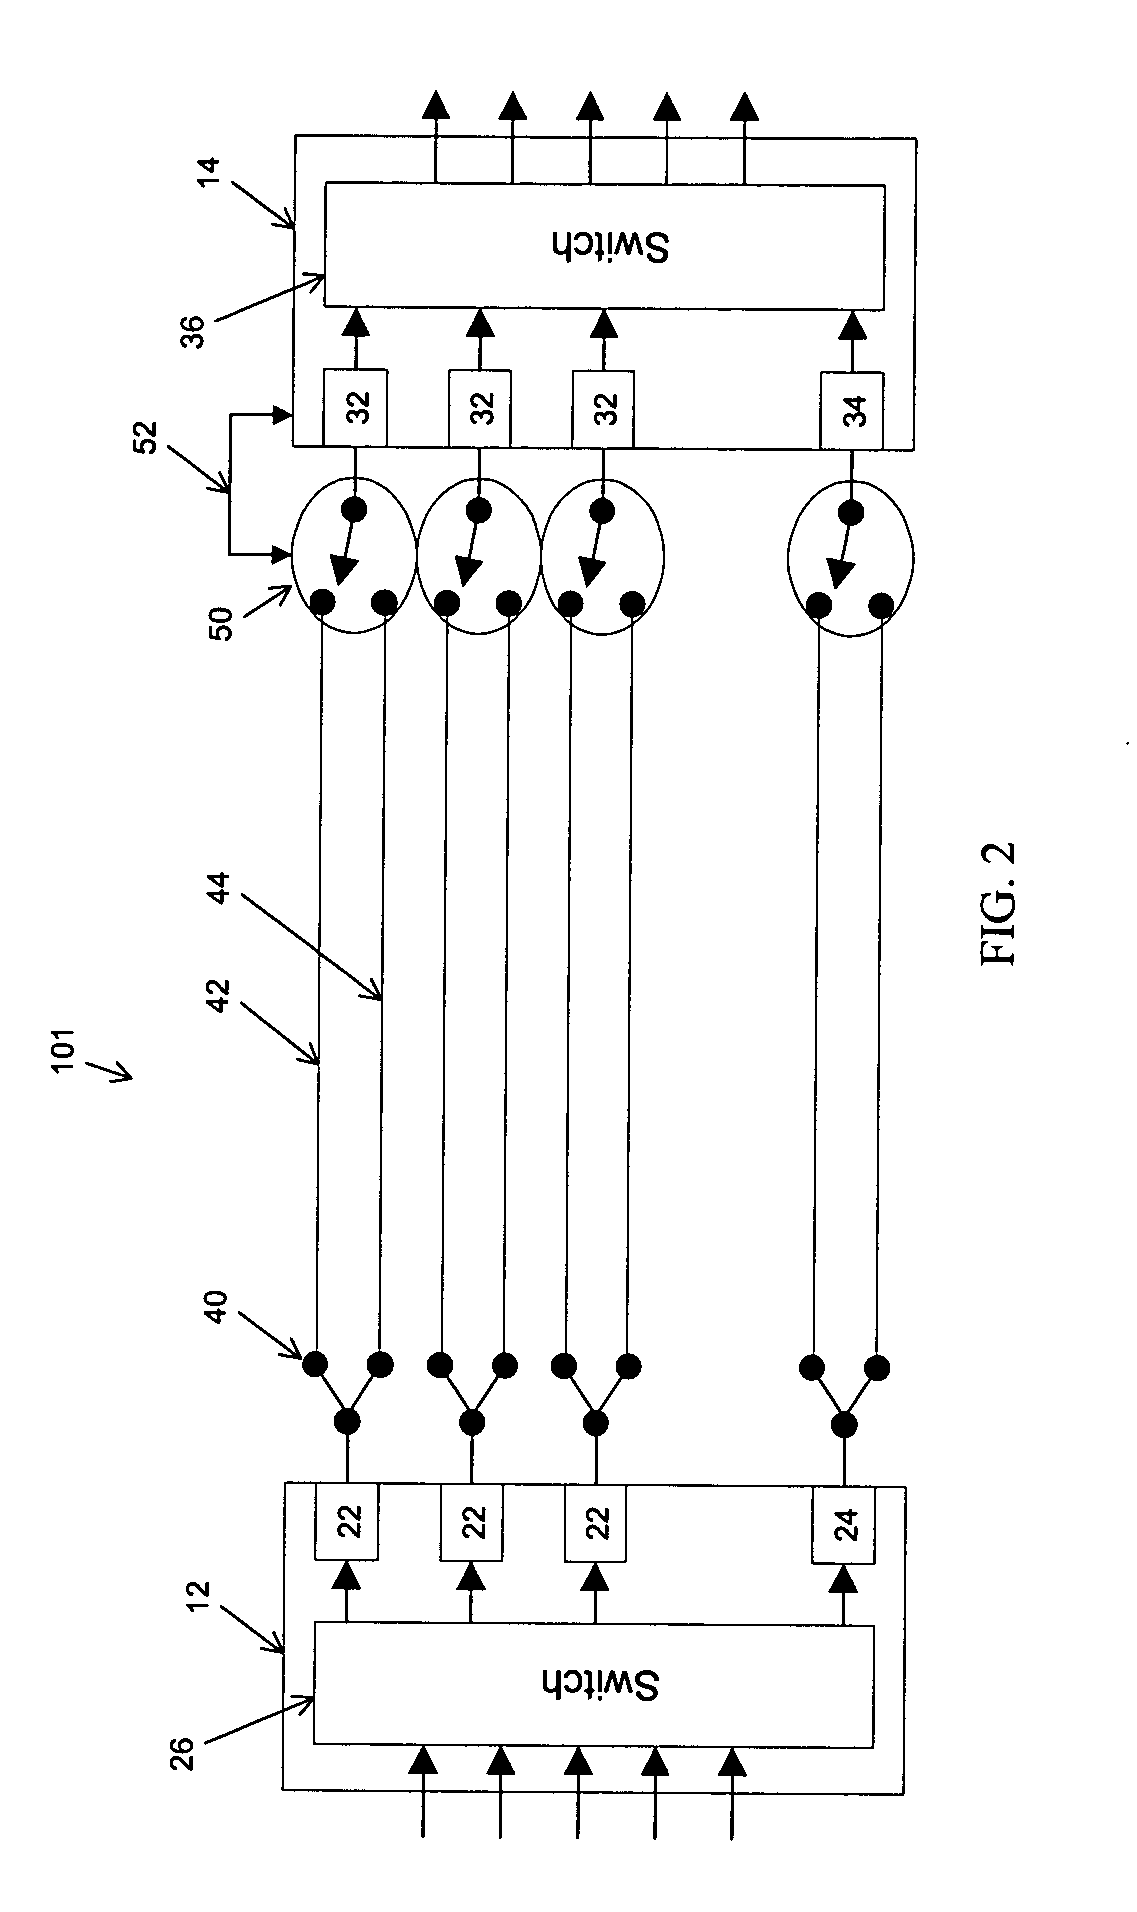 Method and system for providing protection in an optical communication network